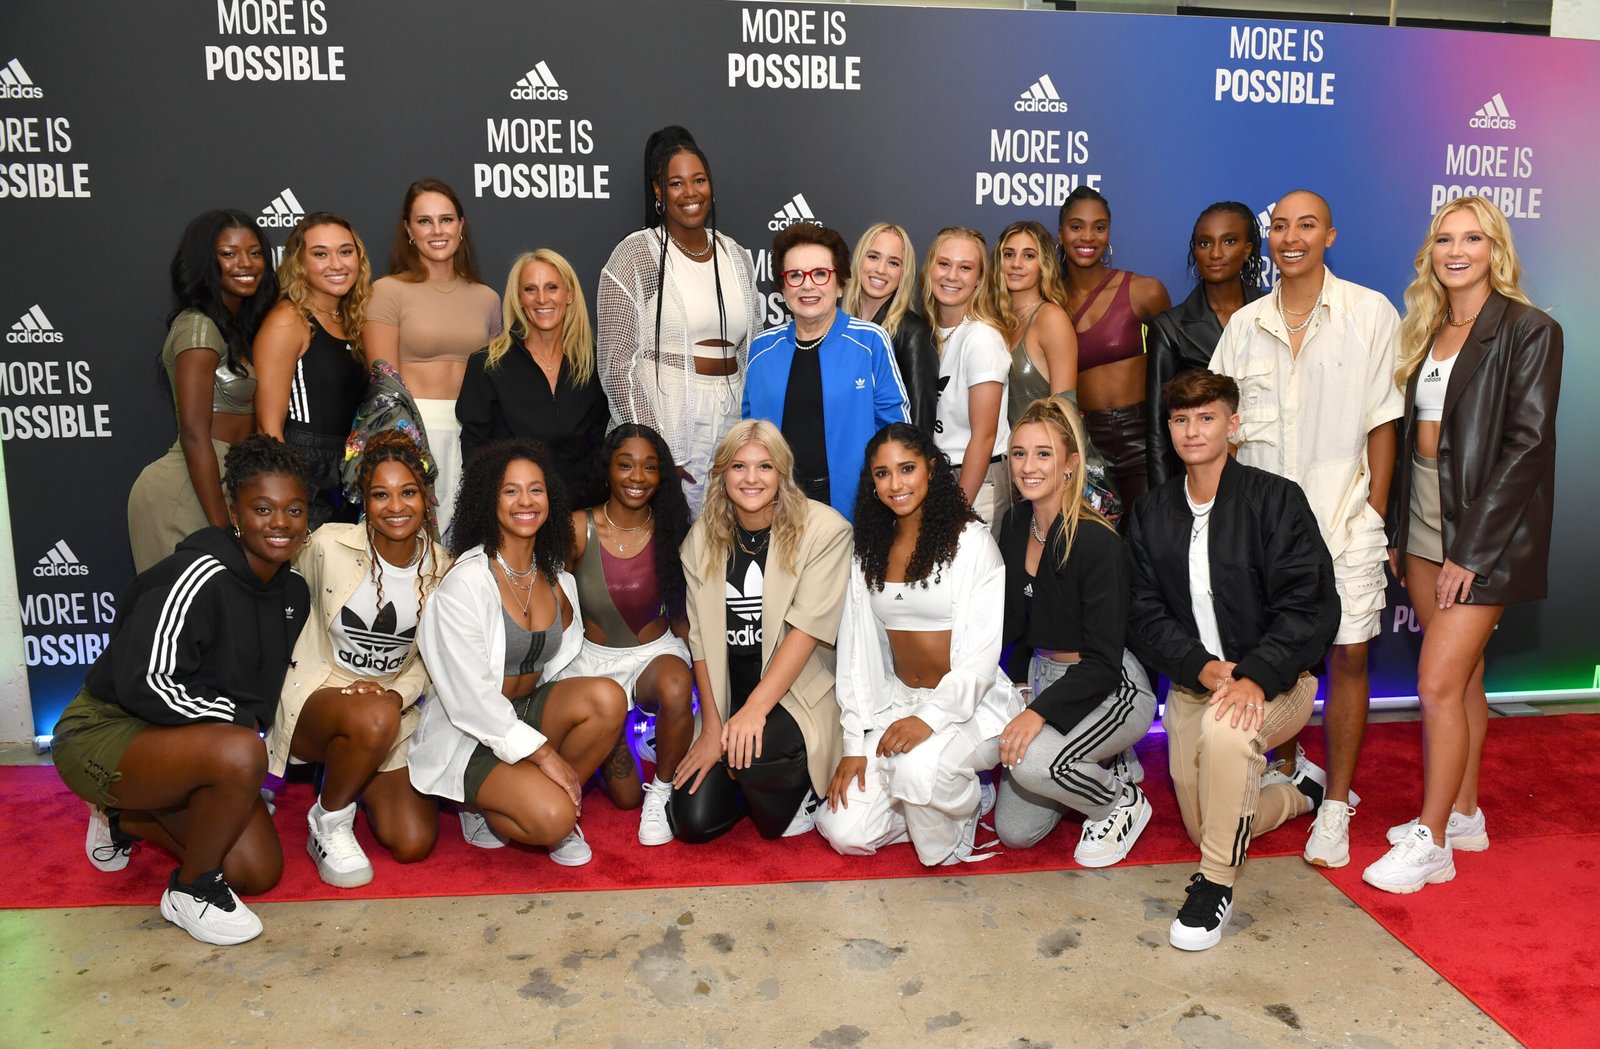 TO CELEBRATE TITLE IX’S 50th ANNIVERSARY ADIDAS SIGNS 15 FEMALE STUDENT-ATHLETES TO NIL DEALS AND ANNOUNCES BRAND INITIATIVES TO PUSH SPORT FORWARD FOR ALL